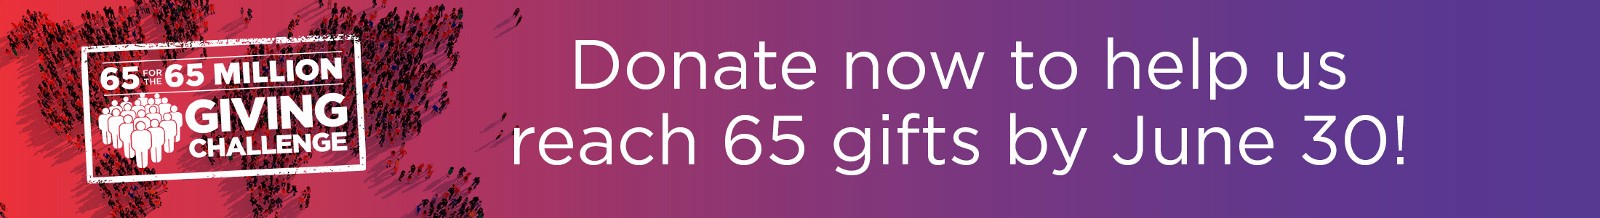 65 for the 65 Million Giving Challenge - Donate now to help us reach 65 gifts by June 30!